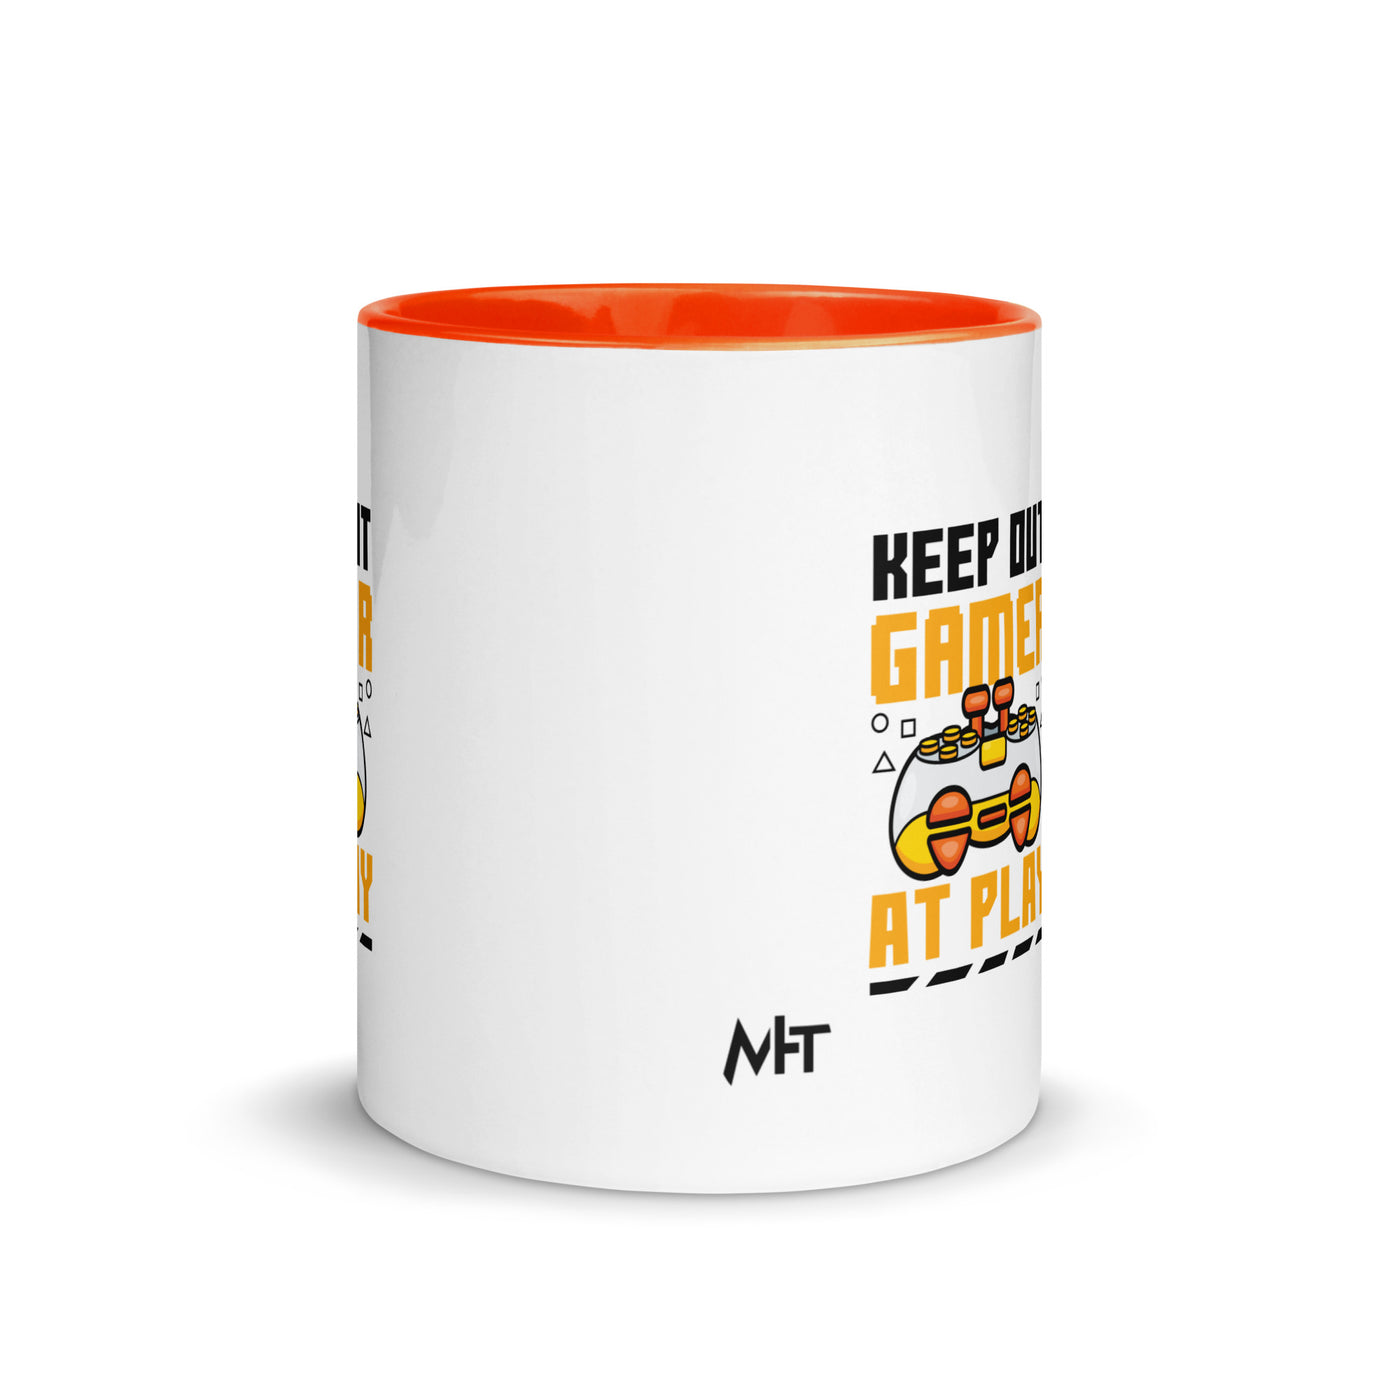 Keep Out Gamer At Play Rima 7 in Dark Text - Mug with Color Inside